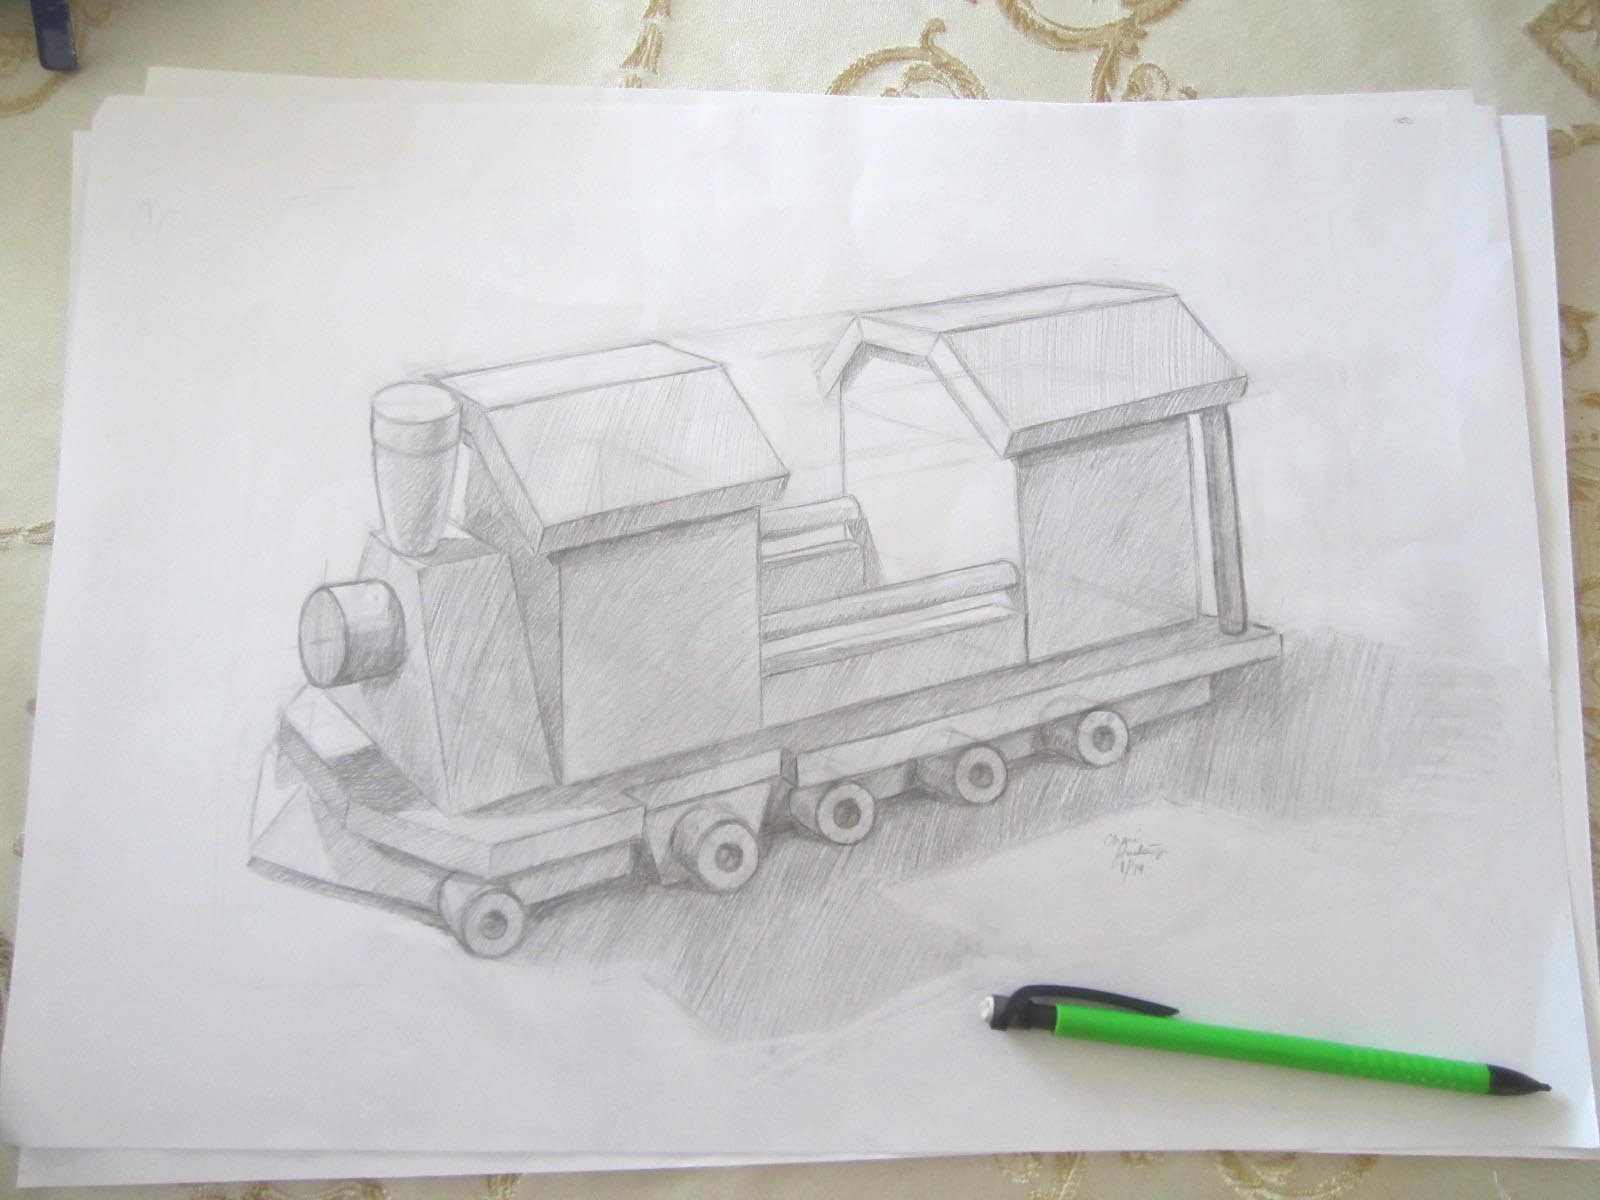 Train- Study from Life